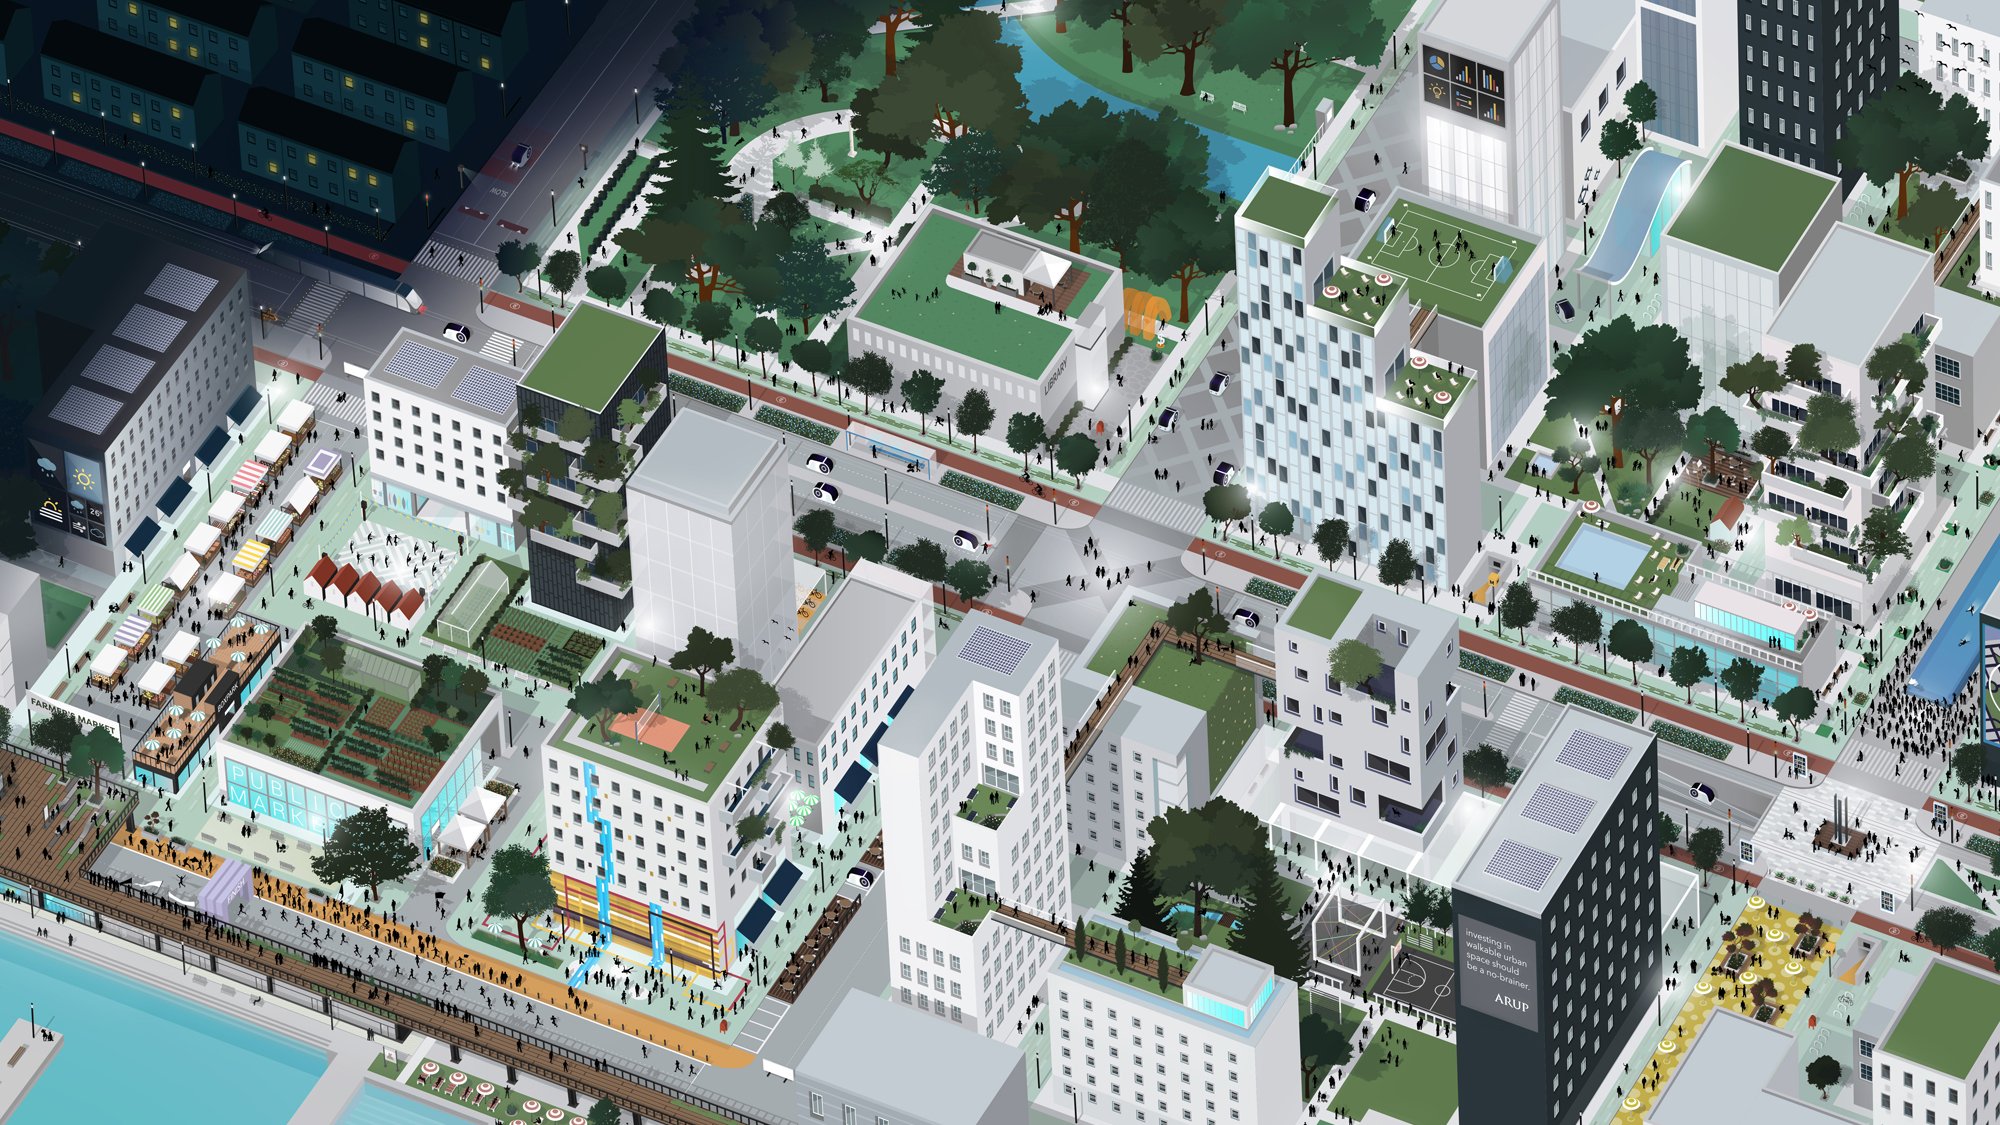 Artist's impression of a walking city. Credit: Arup.